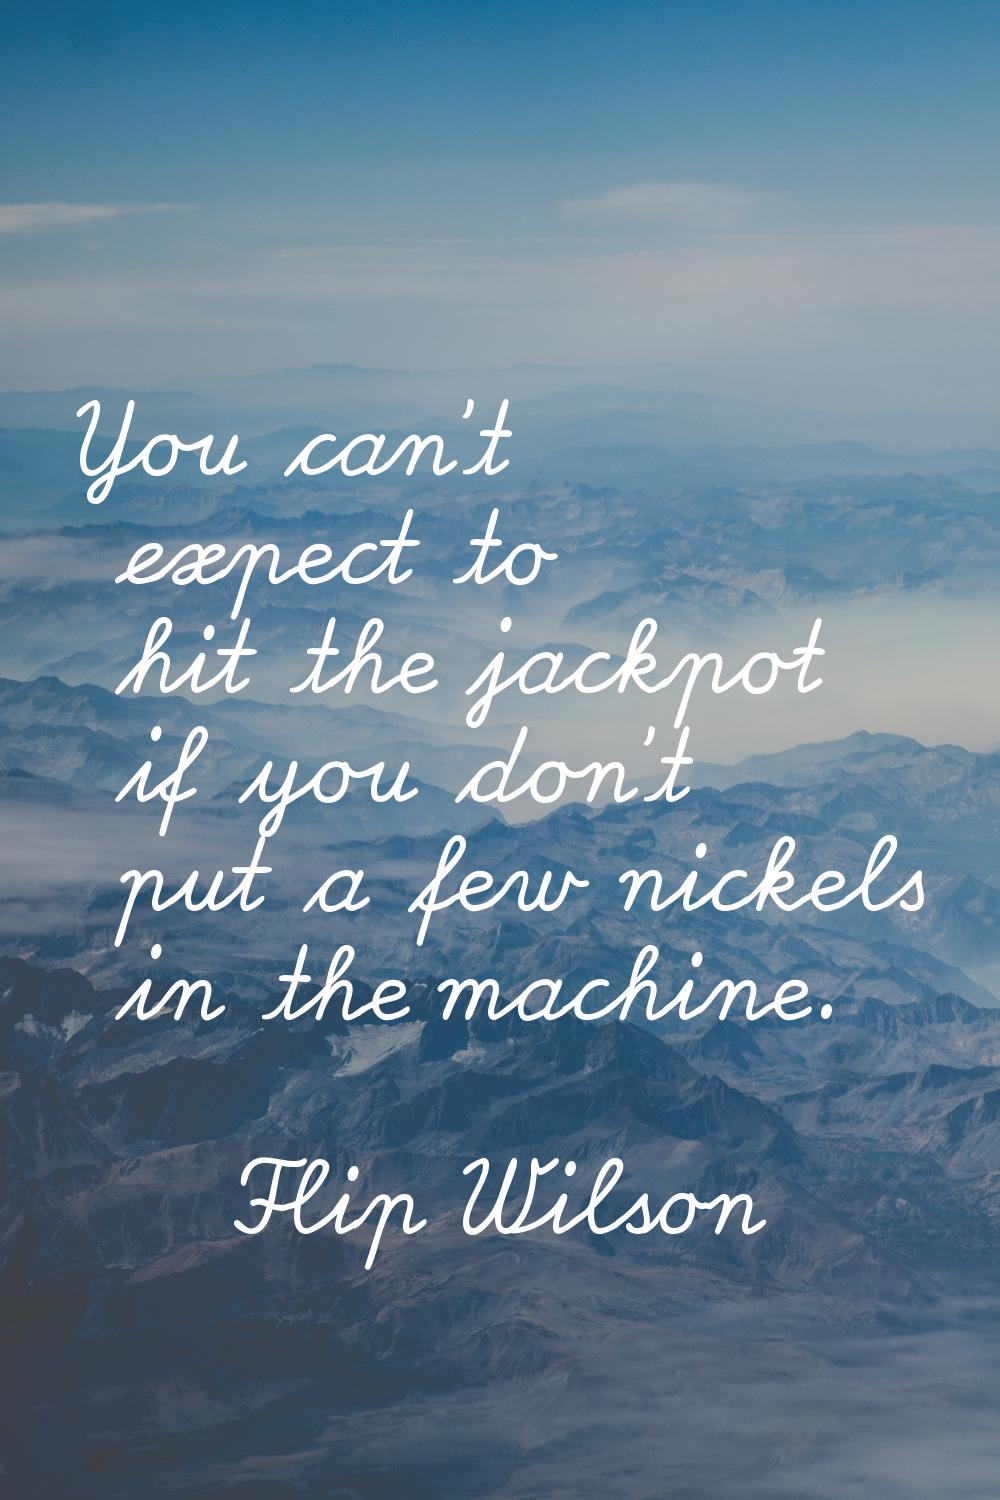 You can't expect to hit the jackpot if you don't put a few nickels in the machine.